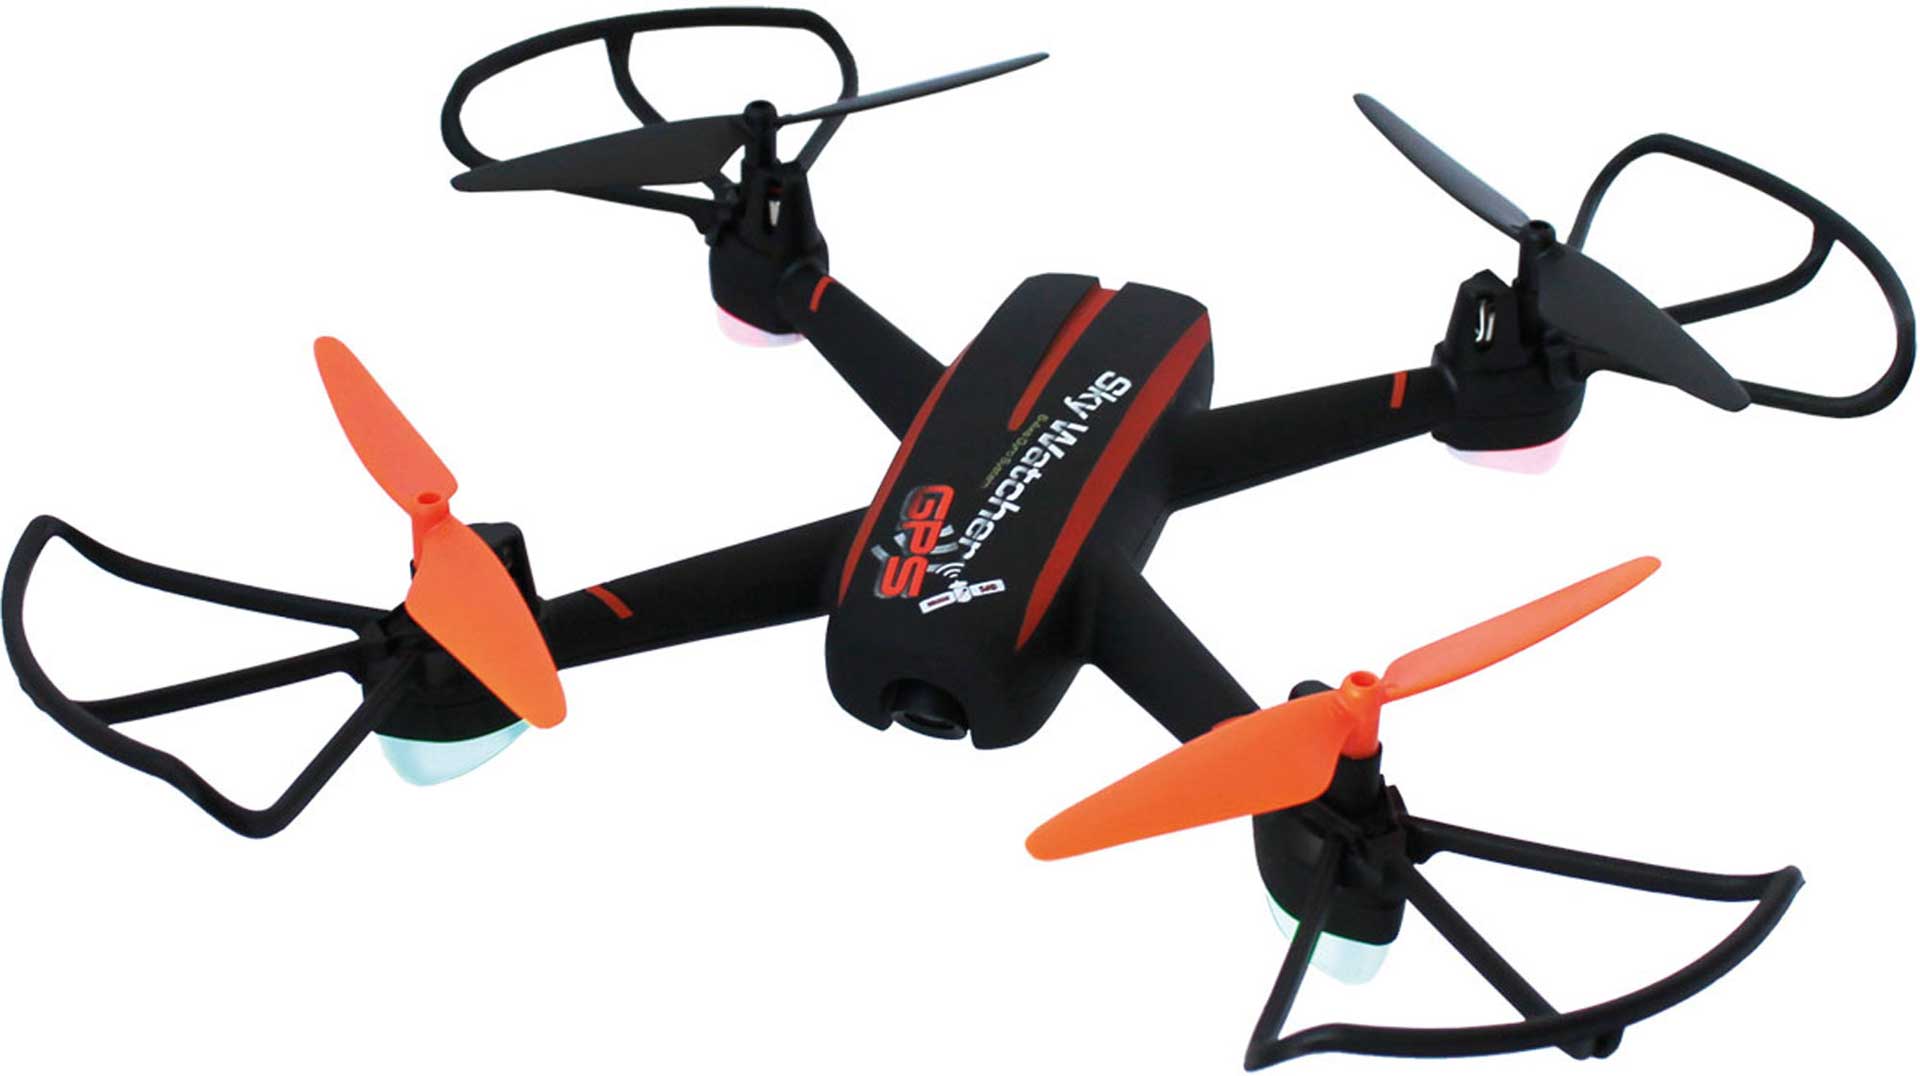 DRIVE & FLY MODELS SKY WATCHER GPS RTF + FPV COPTER drone